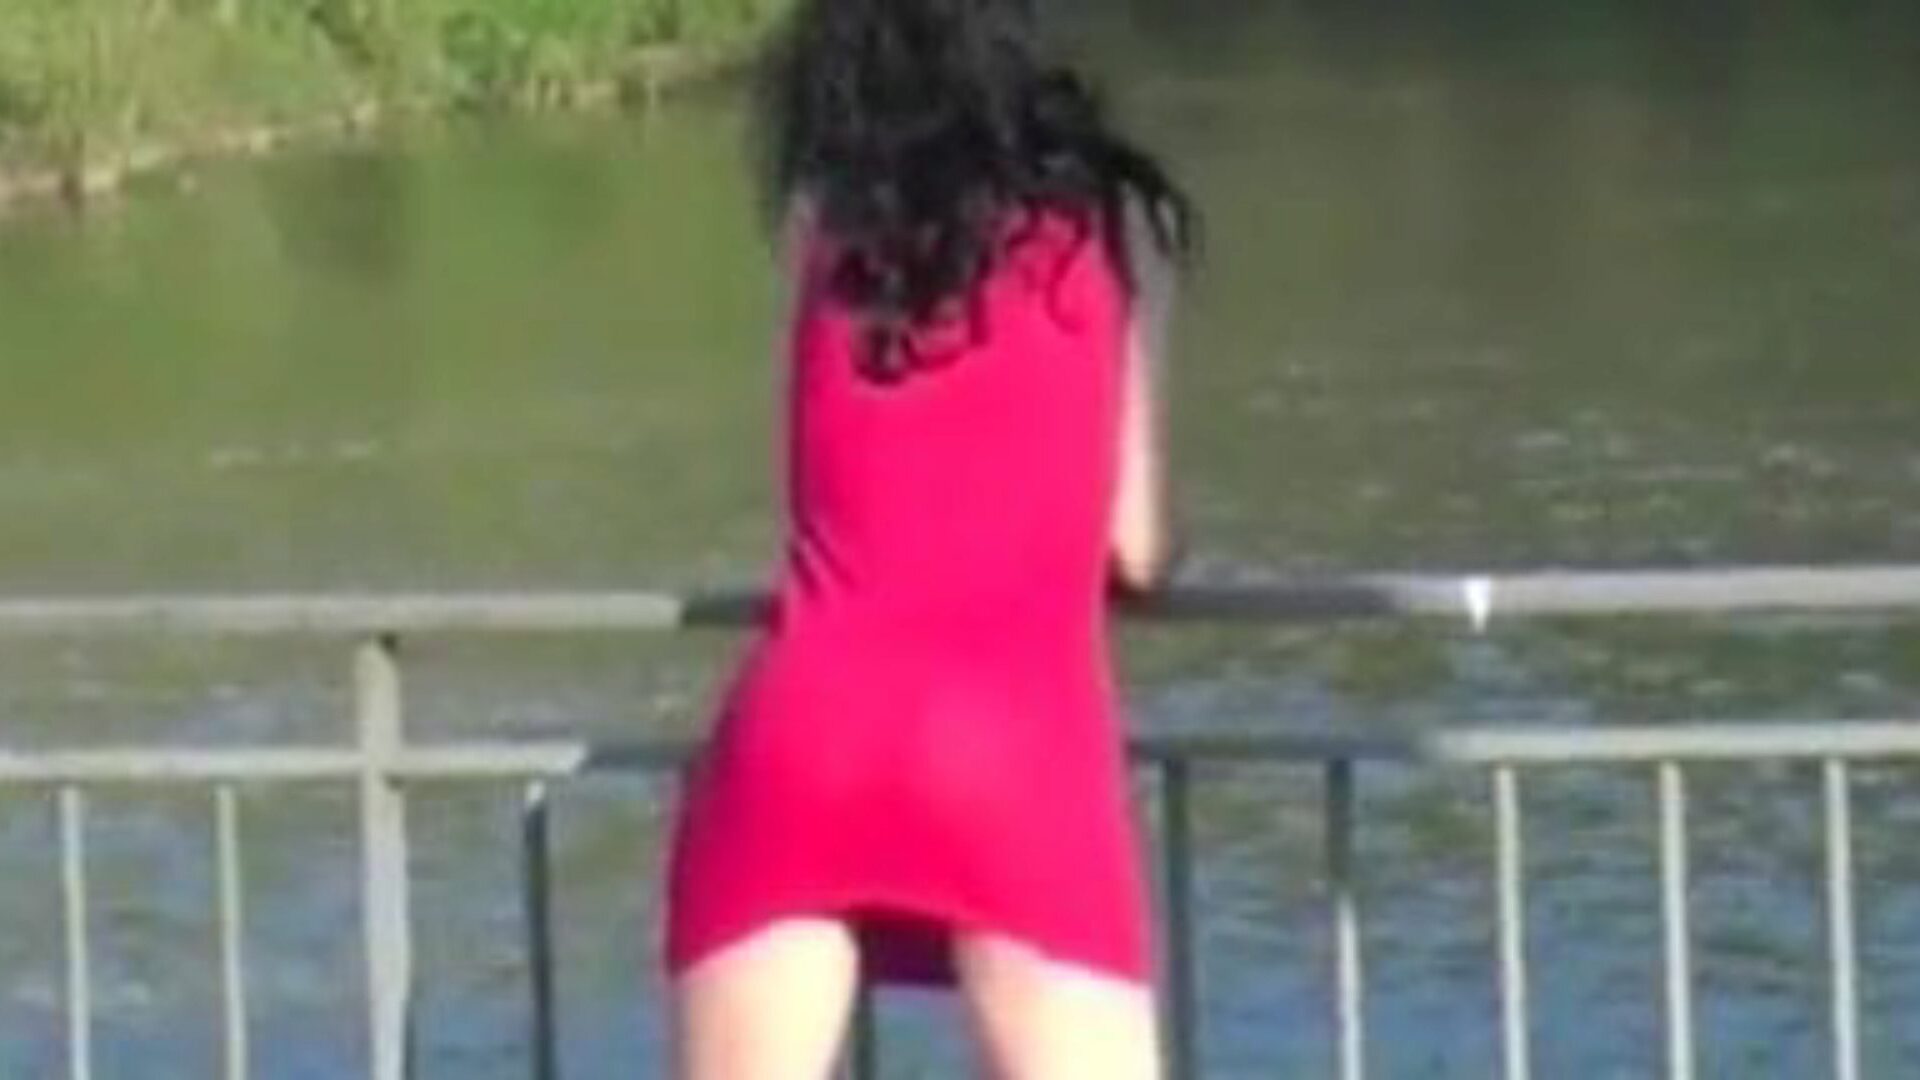 Monica Baisee Au Parc Public, Free Public Tube Porn Video 49 Watch Monica Baisee Au Parc Public episode on xHamster, the most excellent lovemaking tube web site with tons of free-for-all Public Tube Public Xnxx & Pussy porno movies